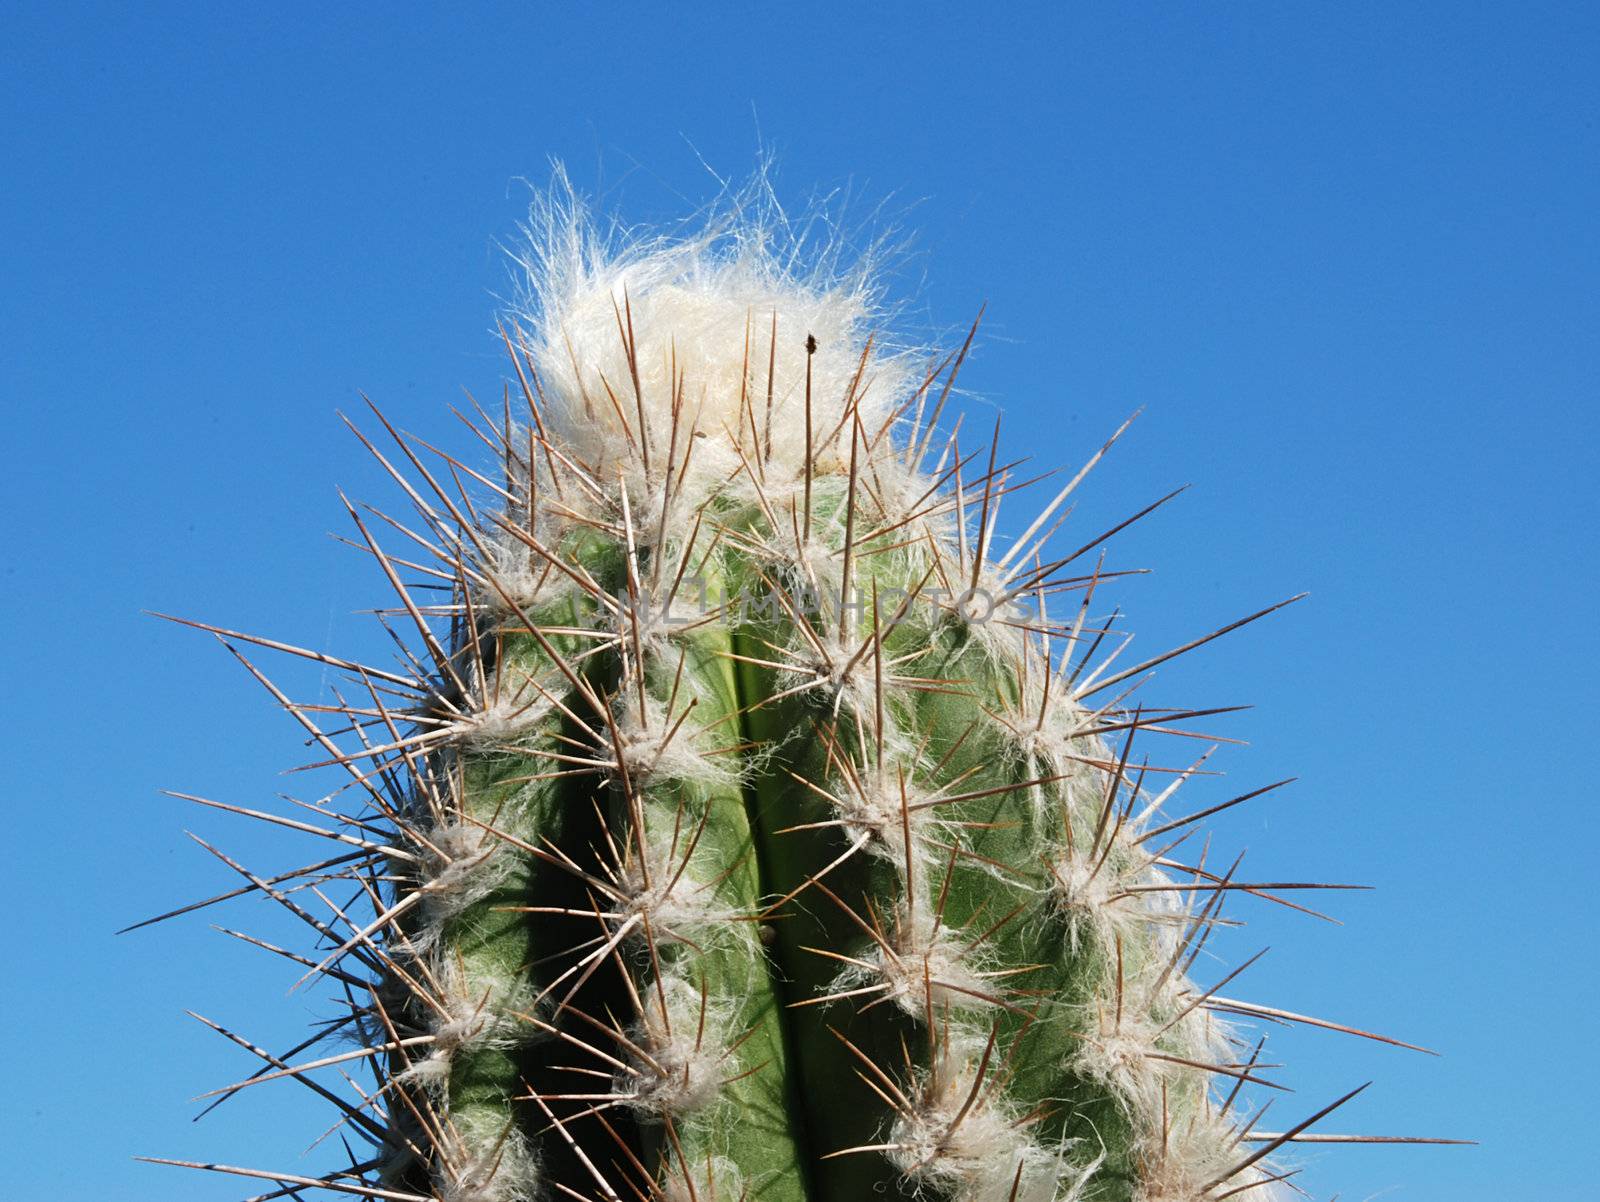 Detail of a Green Cactus on Blue Sky